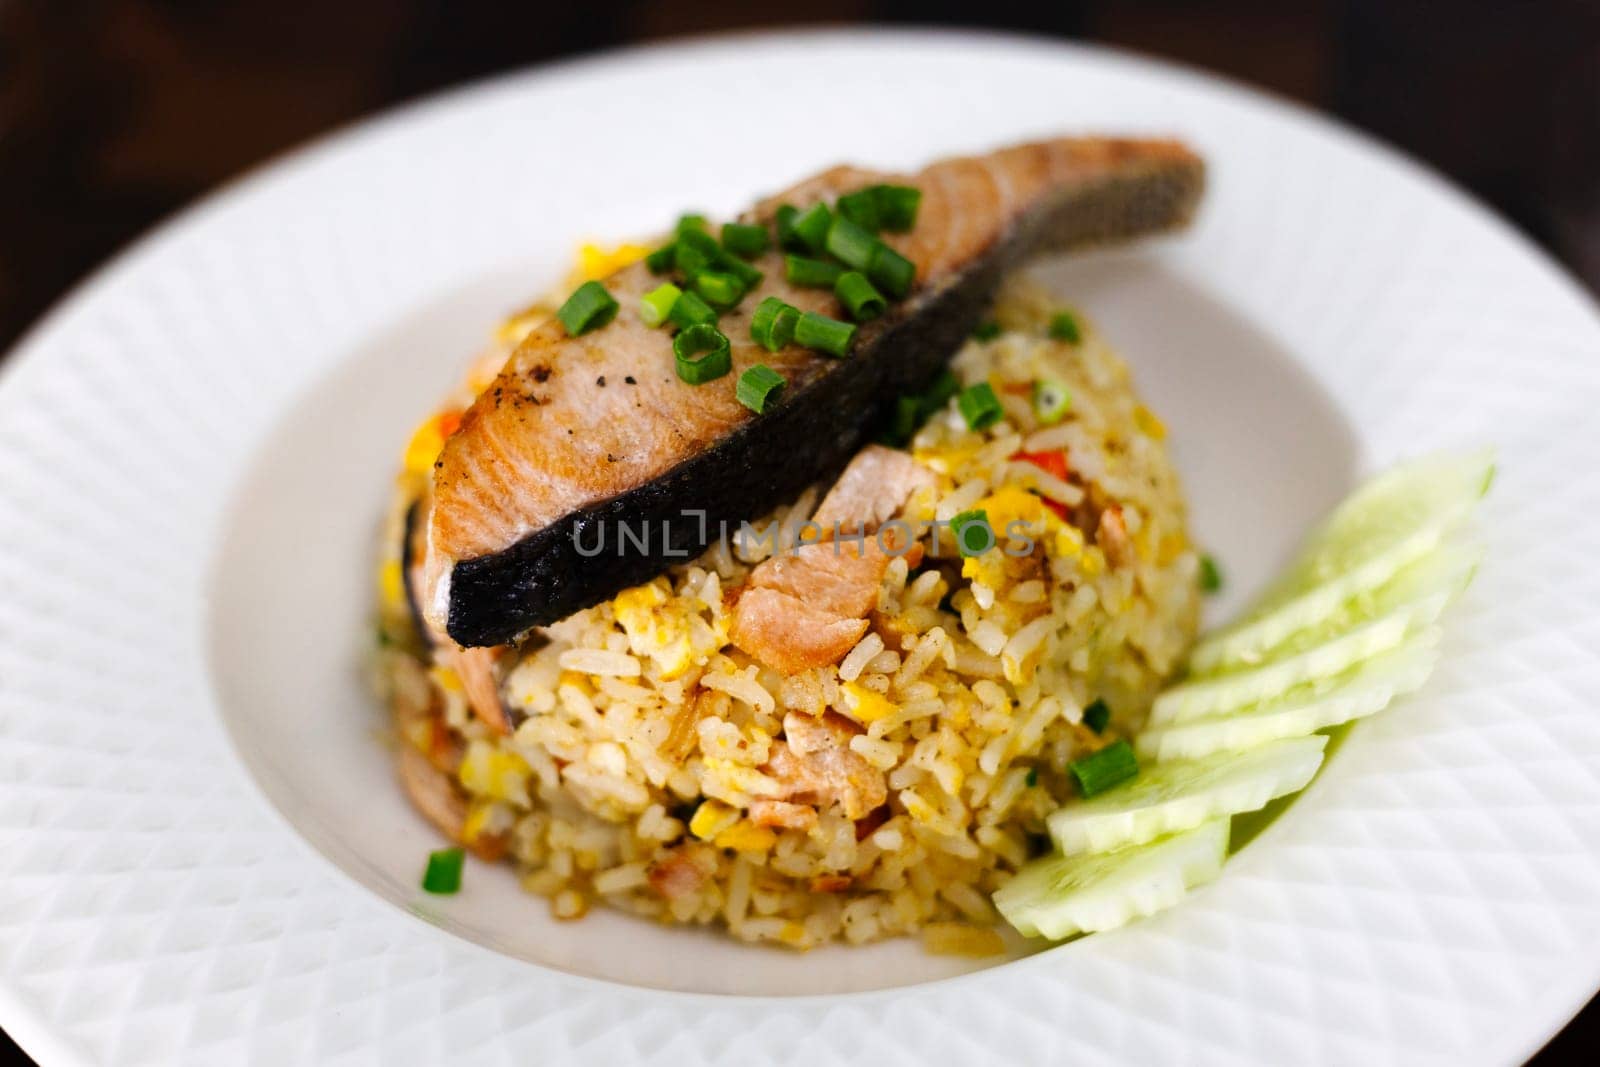 Fried rice with grilled salmon fillet steak on white plate.